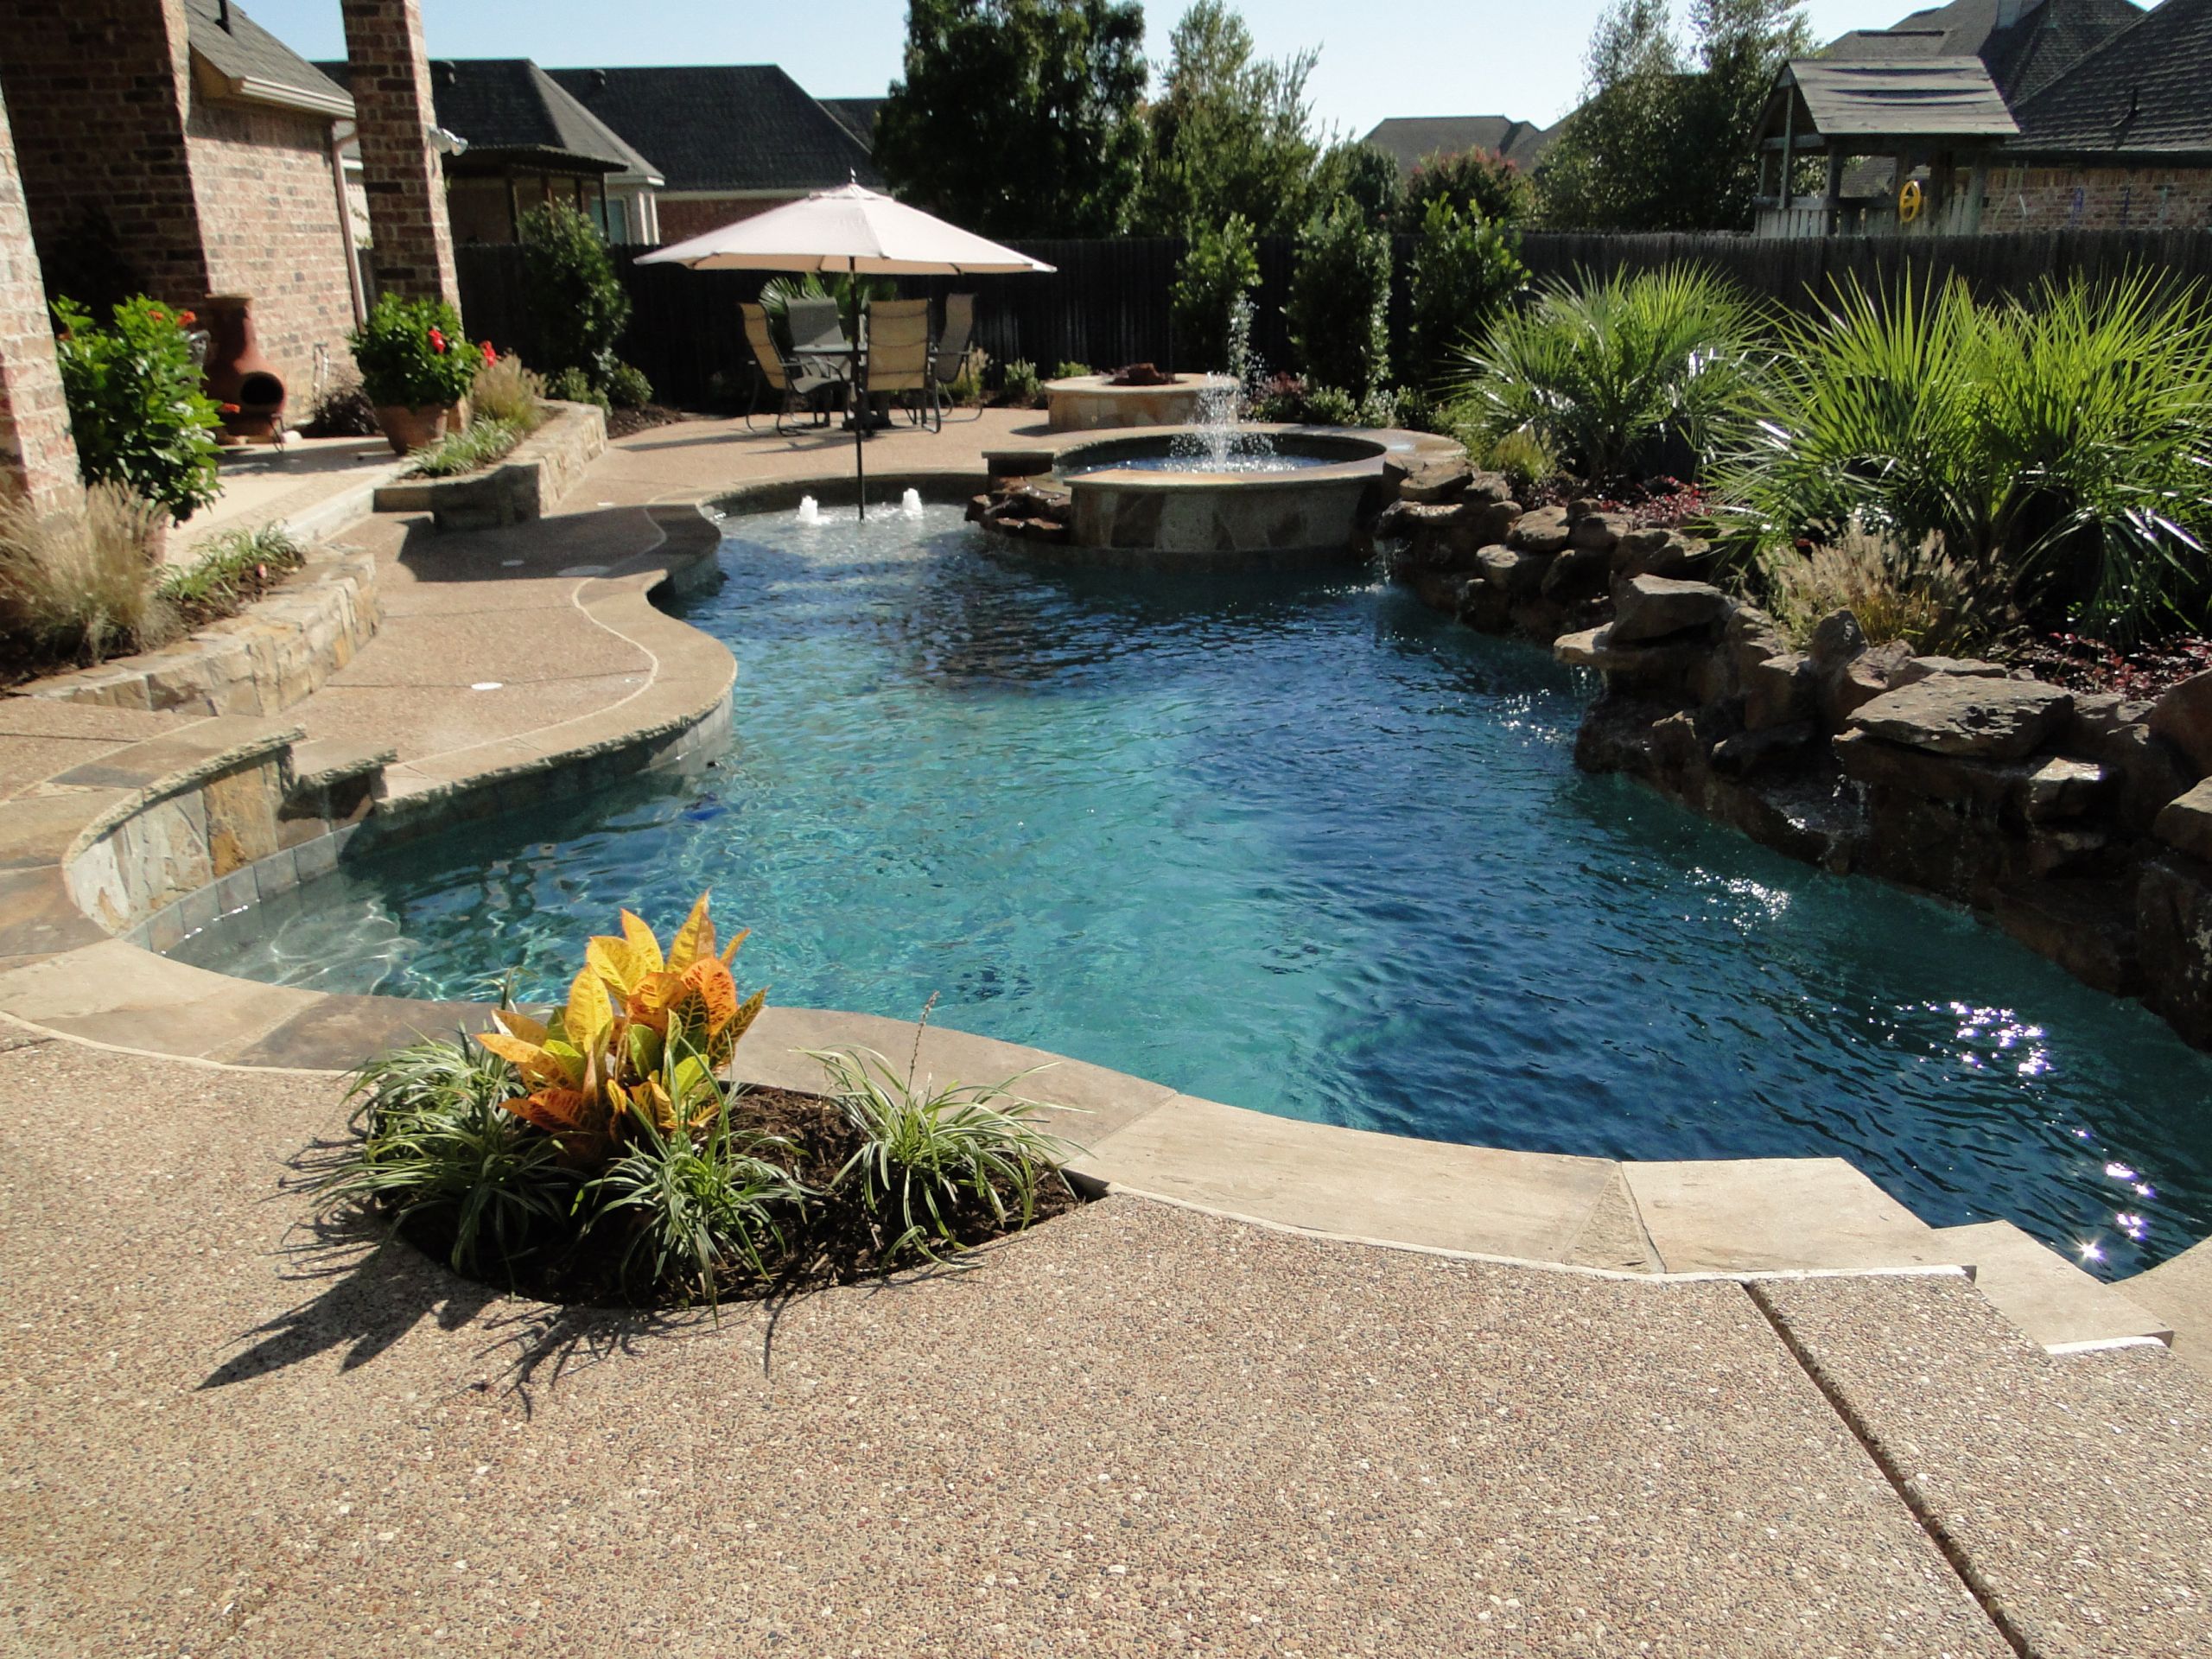 Pool Landscapes Designs Luxury Backyard Landscaping Ideas Swimming Pool Design